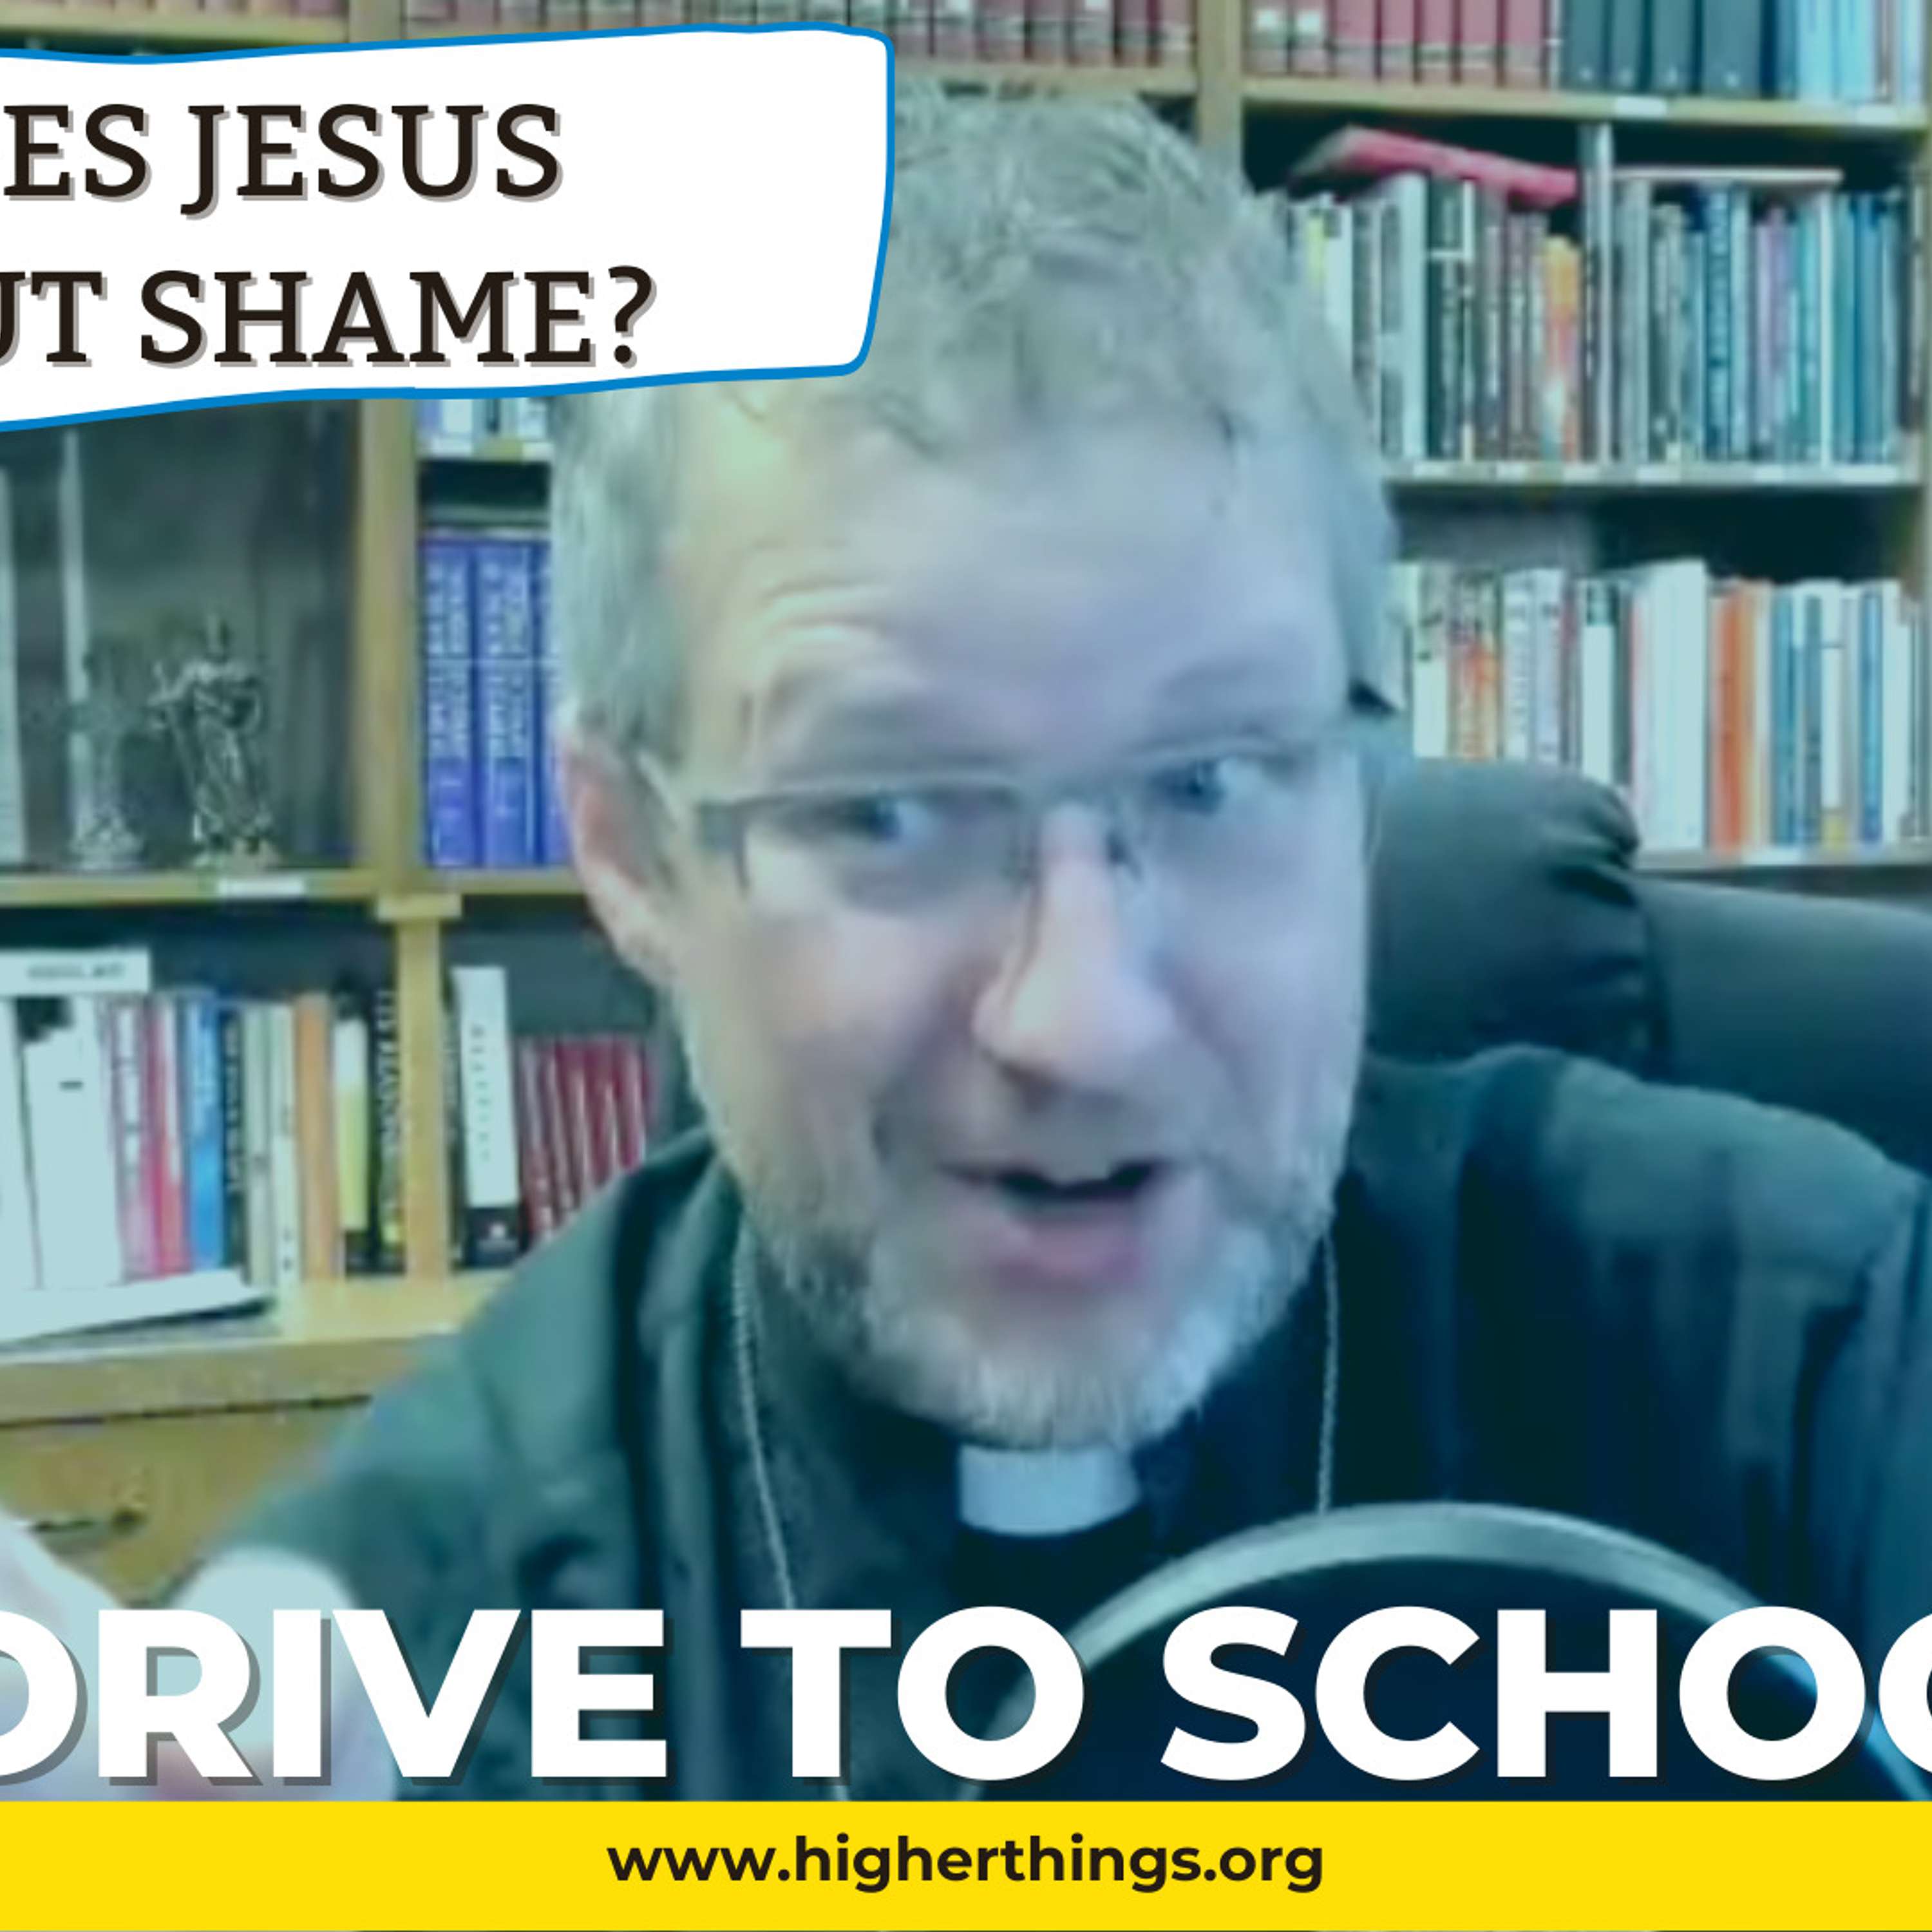 What does Jesus say about shame?